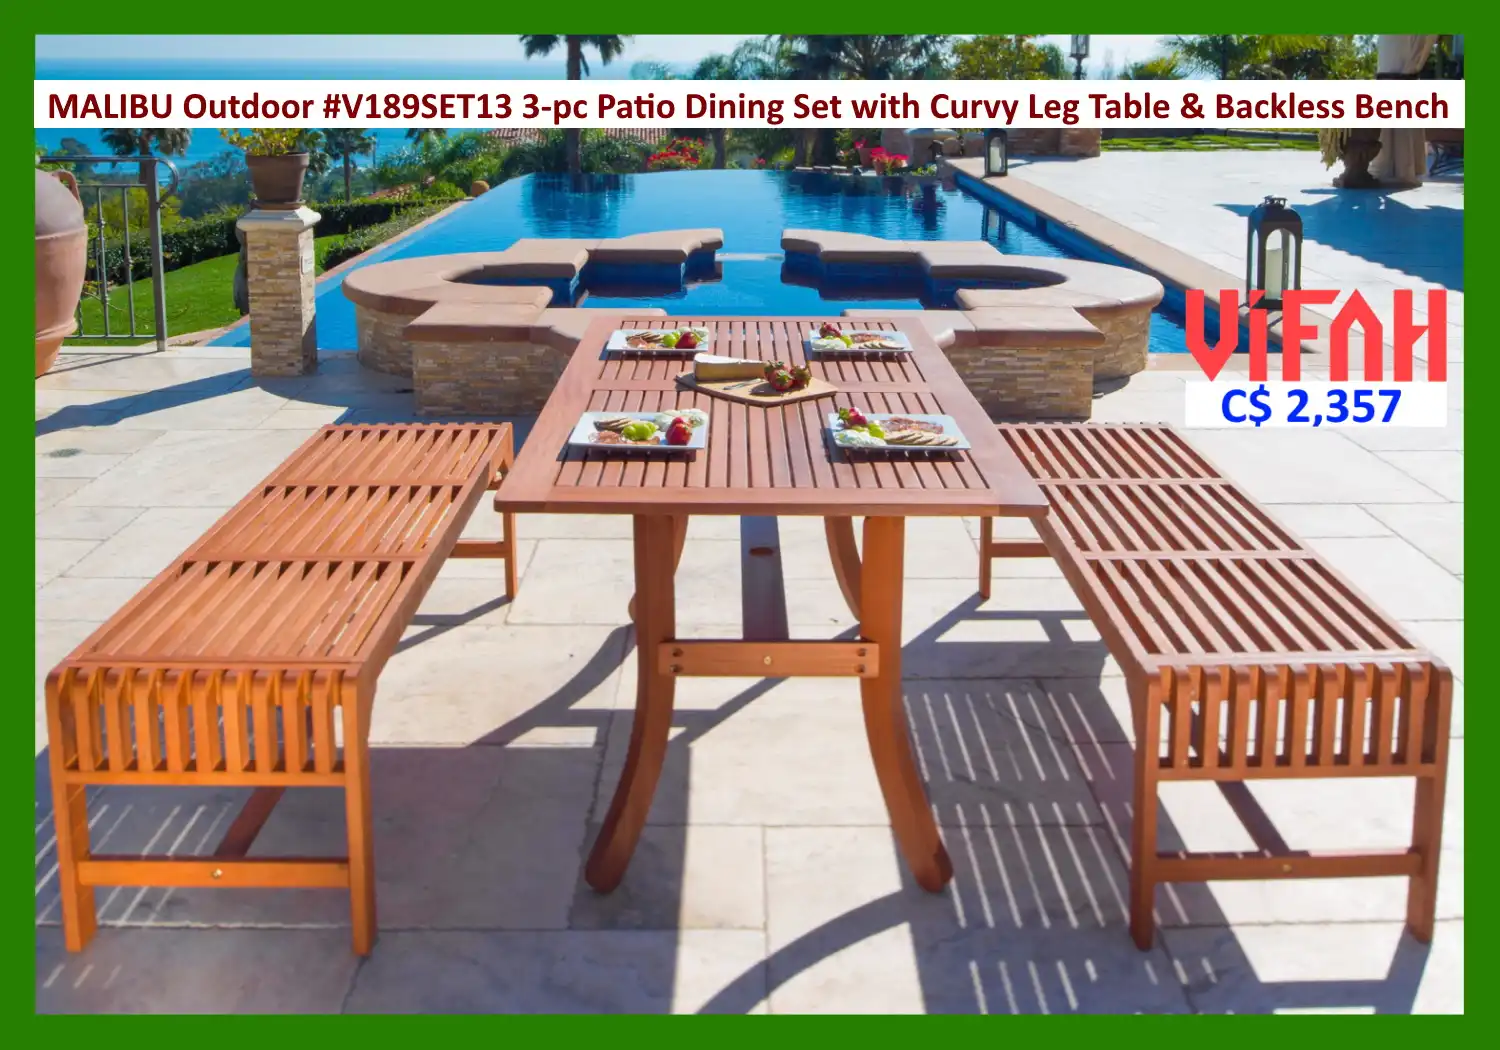 MALIBU Outdoor #V189SET13 3-piece Wood Patio Dining Set with Curvy Leg Table & Backless Bench